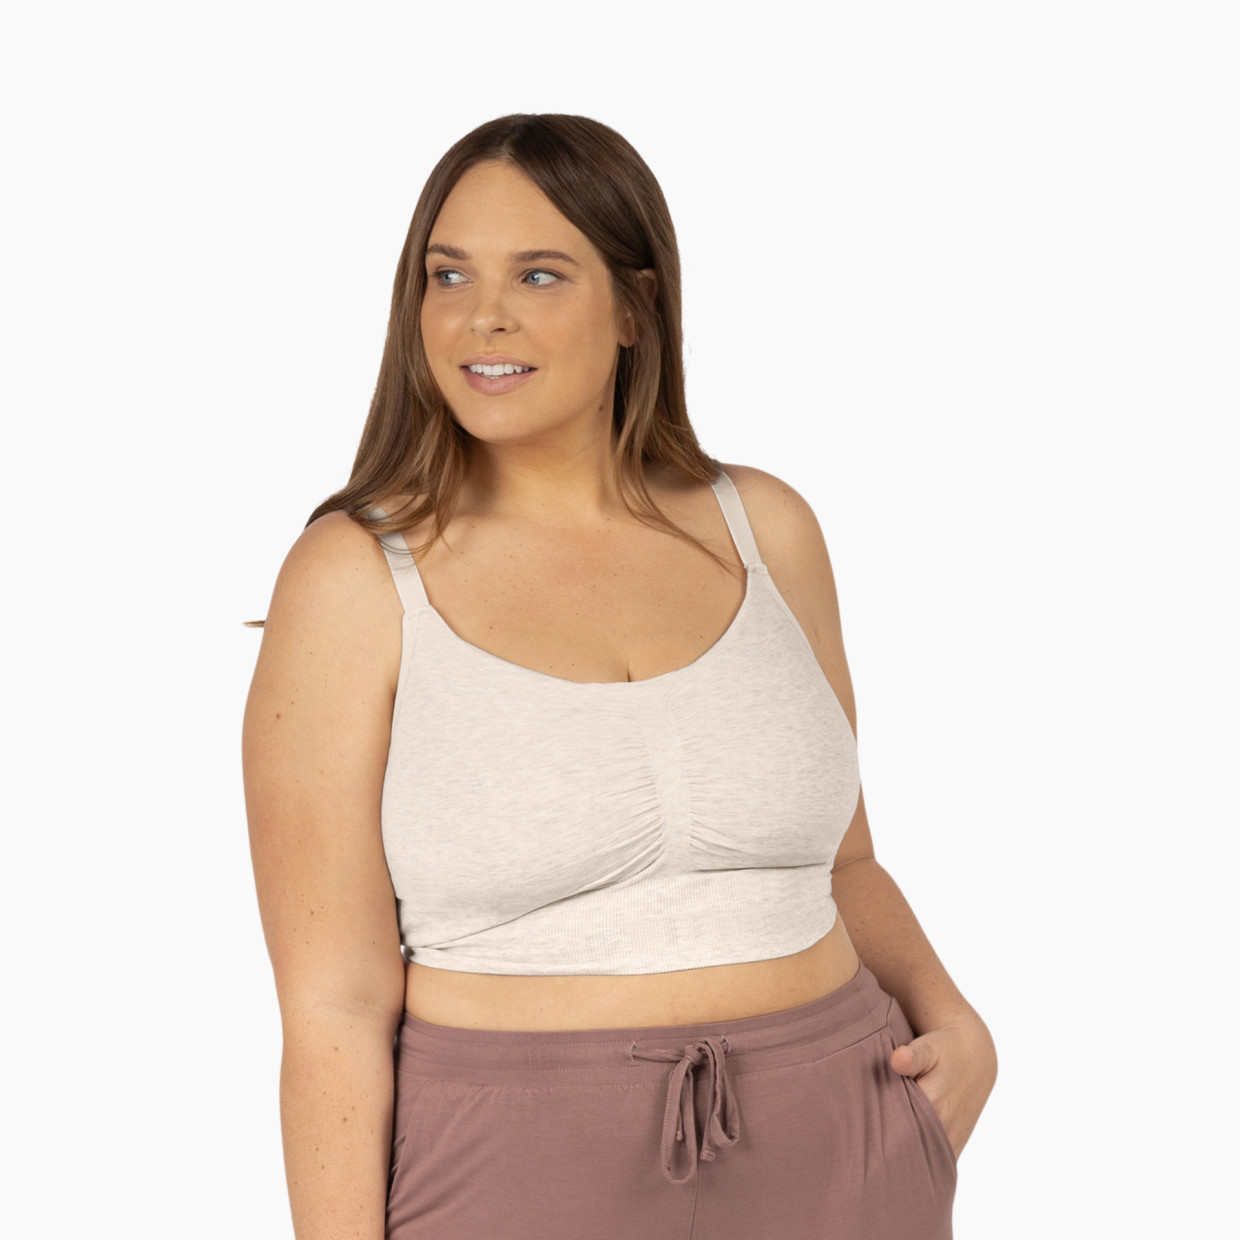 Kindred Bravely Sublime Bamboo Hands-Free Pumping Lounge & Sleep Bra - Oatmeal Heather, X-Large.